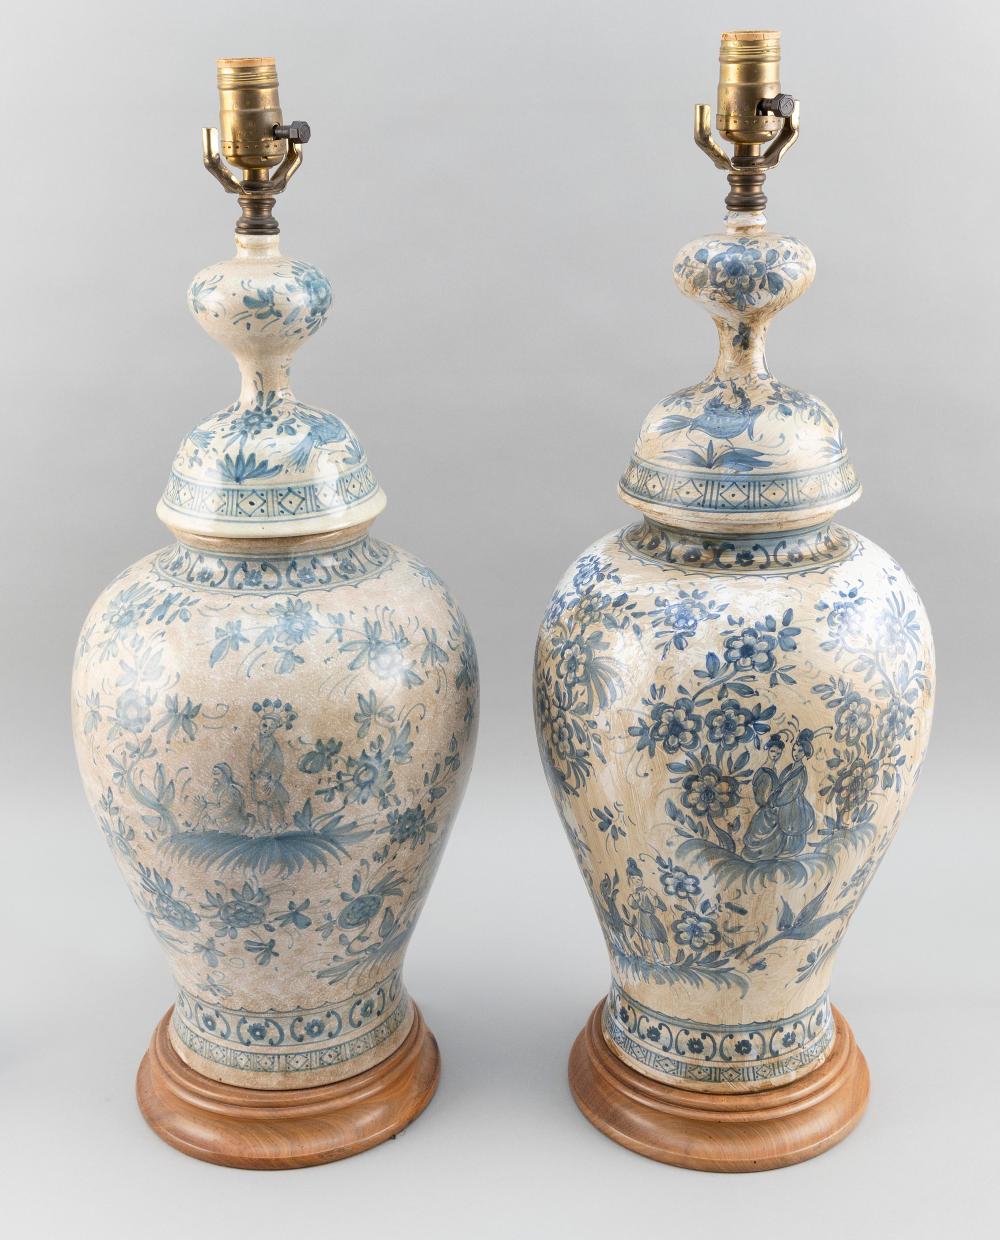 PAIR OF BLUE AND WHITE PORCELAIN